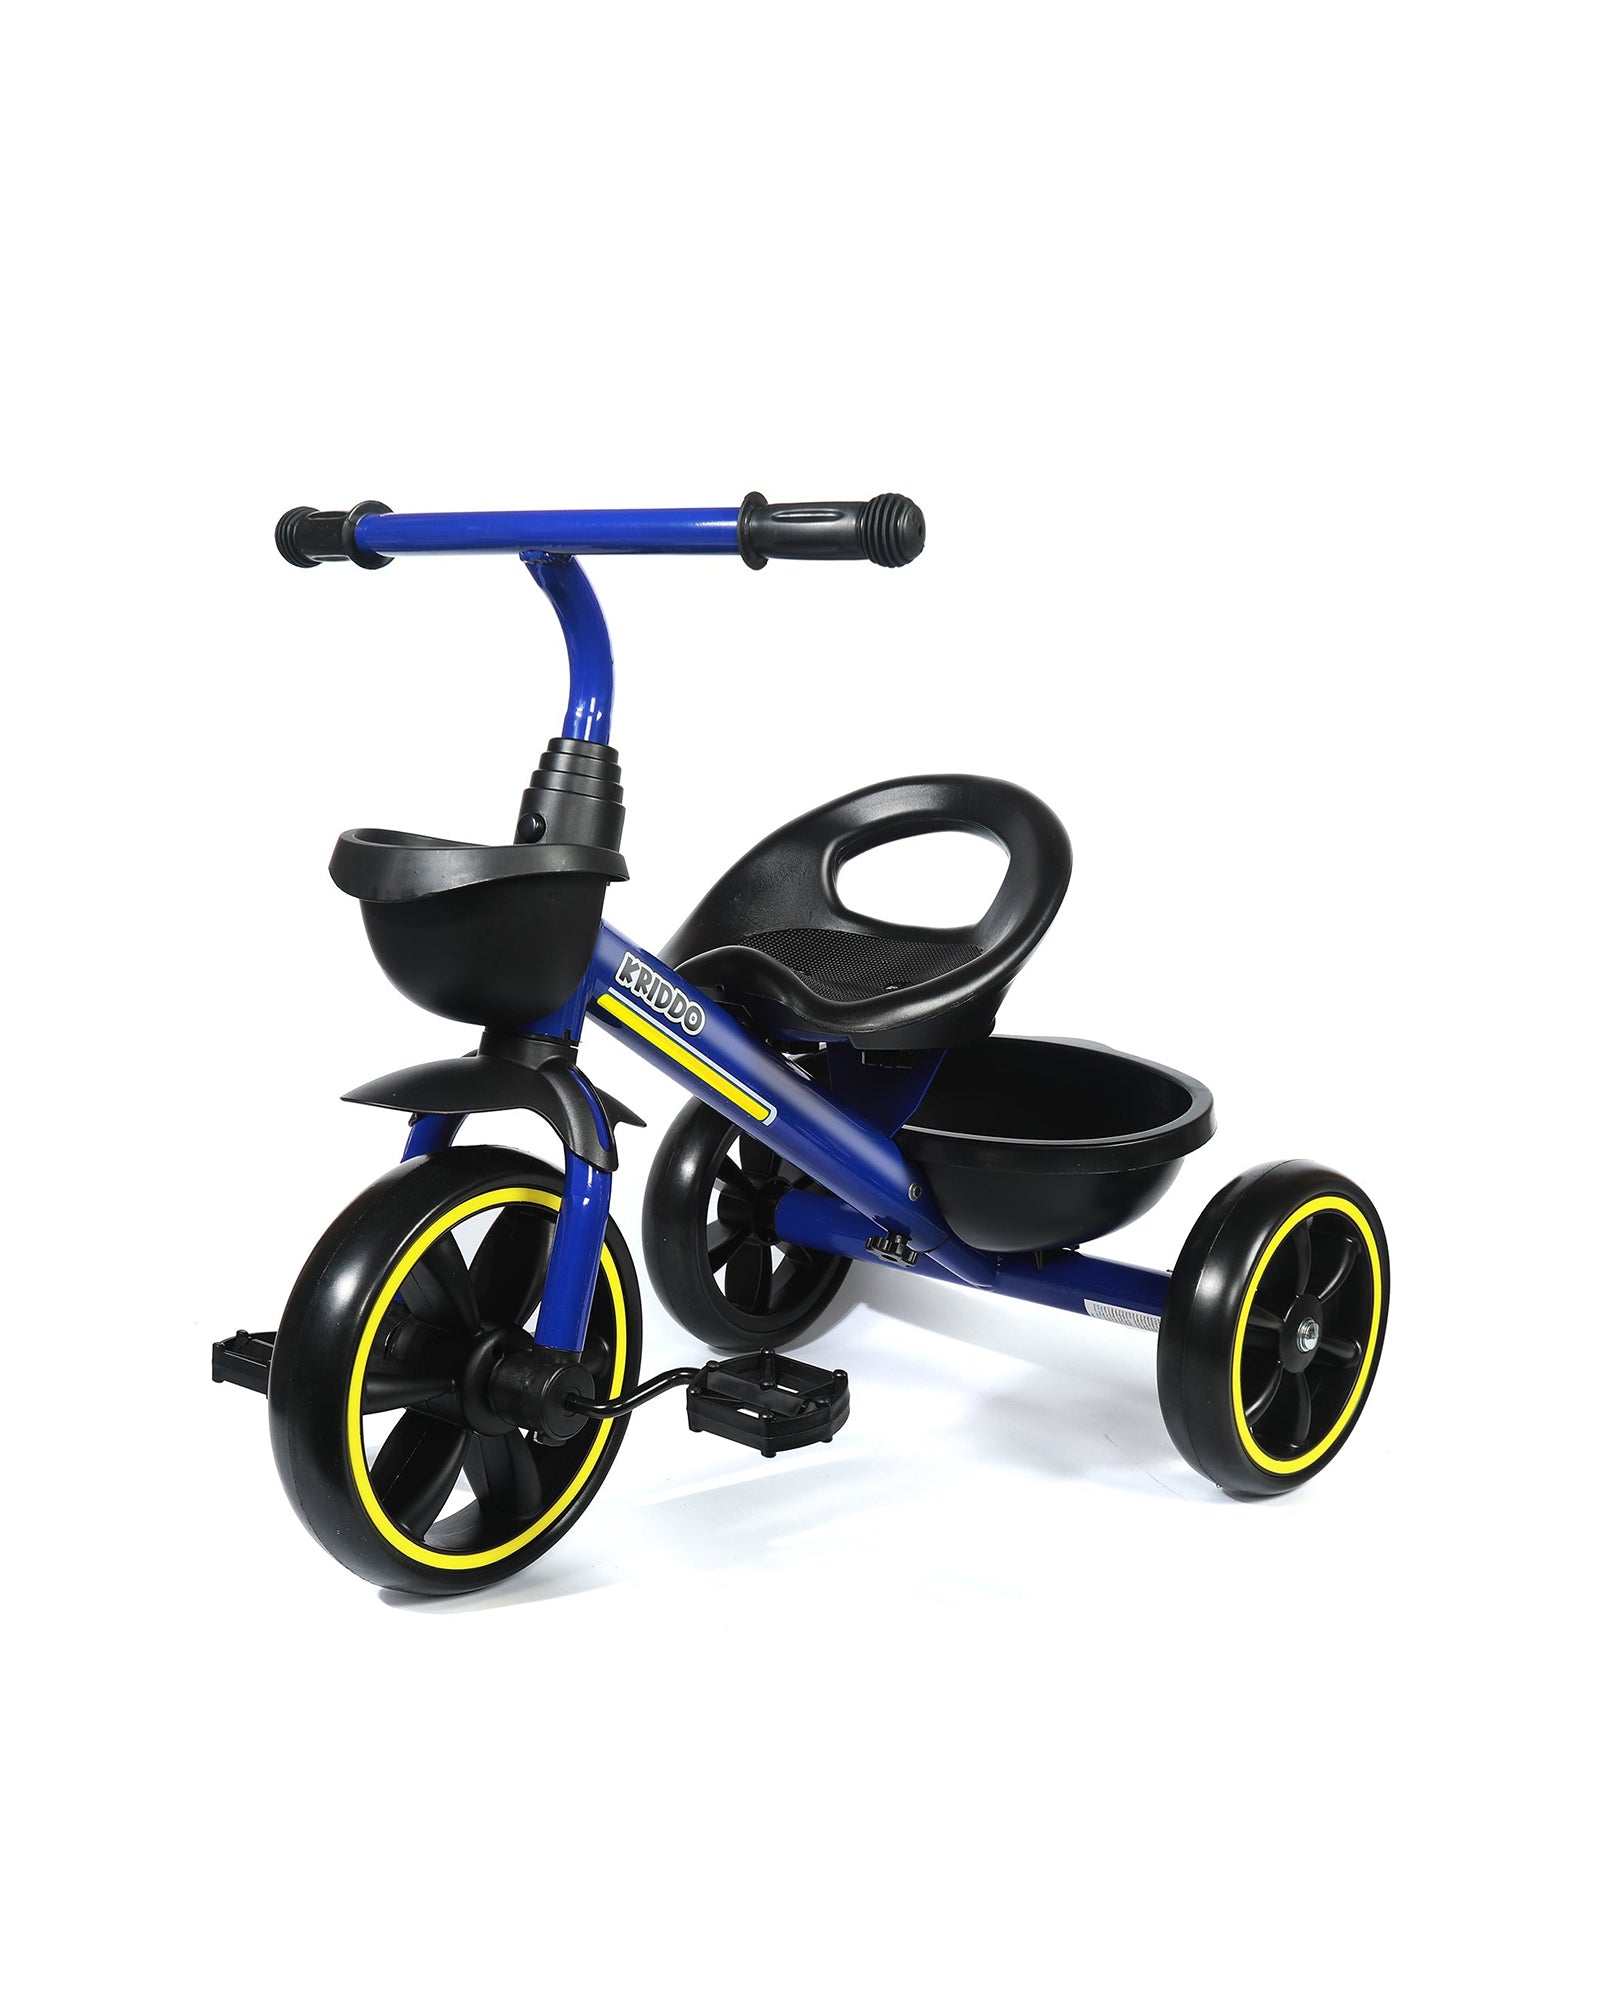 KRIDDO Kids Tricycles for 2- 5 Years, Gift Toddler Tricycles for 2-5 Year Olds, Easy Assembly, Blue